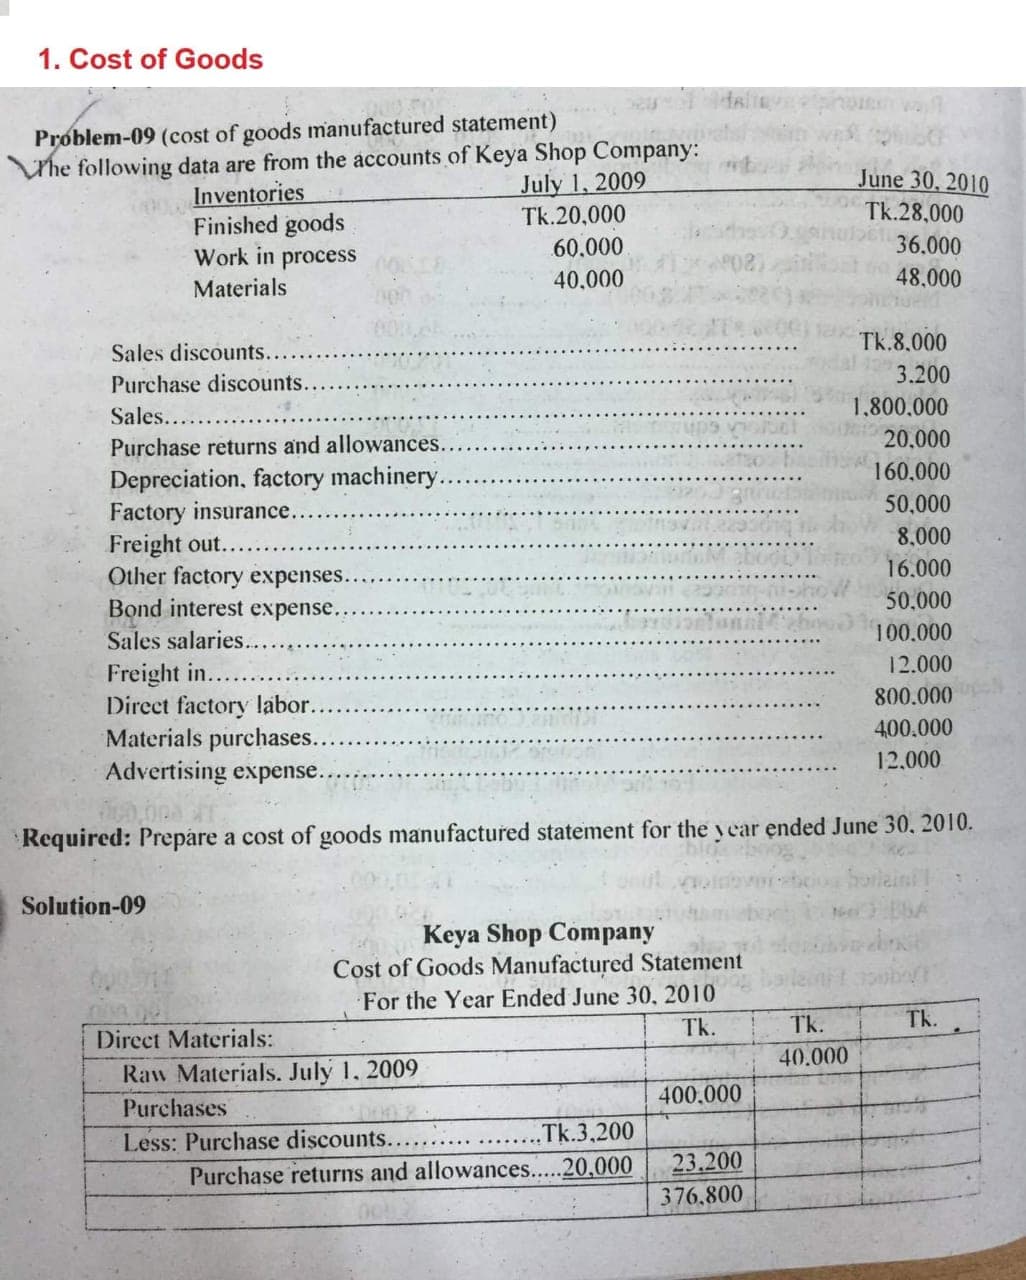 1. Cost of Goods
Problem-09 (cost of goods manufactured statement)
Yhe following data are from the accounts of Keya Shop Company:
July 1, 2009
June 30, 2010
Tk.28,000
Inventories
Finished goods
Work in process
Tk.20,000
60.000
36.000
40,000
48.000
Materials
Tk.8.000
Sales discounts.
3.200
Purchase discounts.
1,800.000
Sales....
20.000
Purchase returns and allowances...
160,000
Depreciation, factory machinery.
Factory insurance.
Freight out...
Other factory expenses.
Bond interest expense.
50,000
8.000
16.000
50.000
Sales salaries..
100.000
12.000
Freight in..
Direct factory labor..
Materials purchases..
Advertising expense..
800.000
400.000
12,000
Required: Prepáre a cost of goods manufactured statement for the year ended June 30, 2010.
Solution-09
Keya Shop Company
Cost of Goods Manufactured Statement
For the Year Ended June 30, 2010
Tk.
Tk.
Tk.
Direct Materials:
40.000
Raw Materials. July 1, 2009
400.000
Purchases
Less: Purchase discounts...
Purchase returns and allowances..20,000
„Tk.3,200
23.200
376,800
